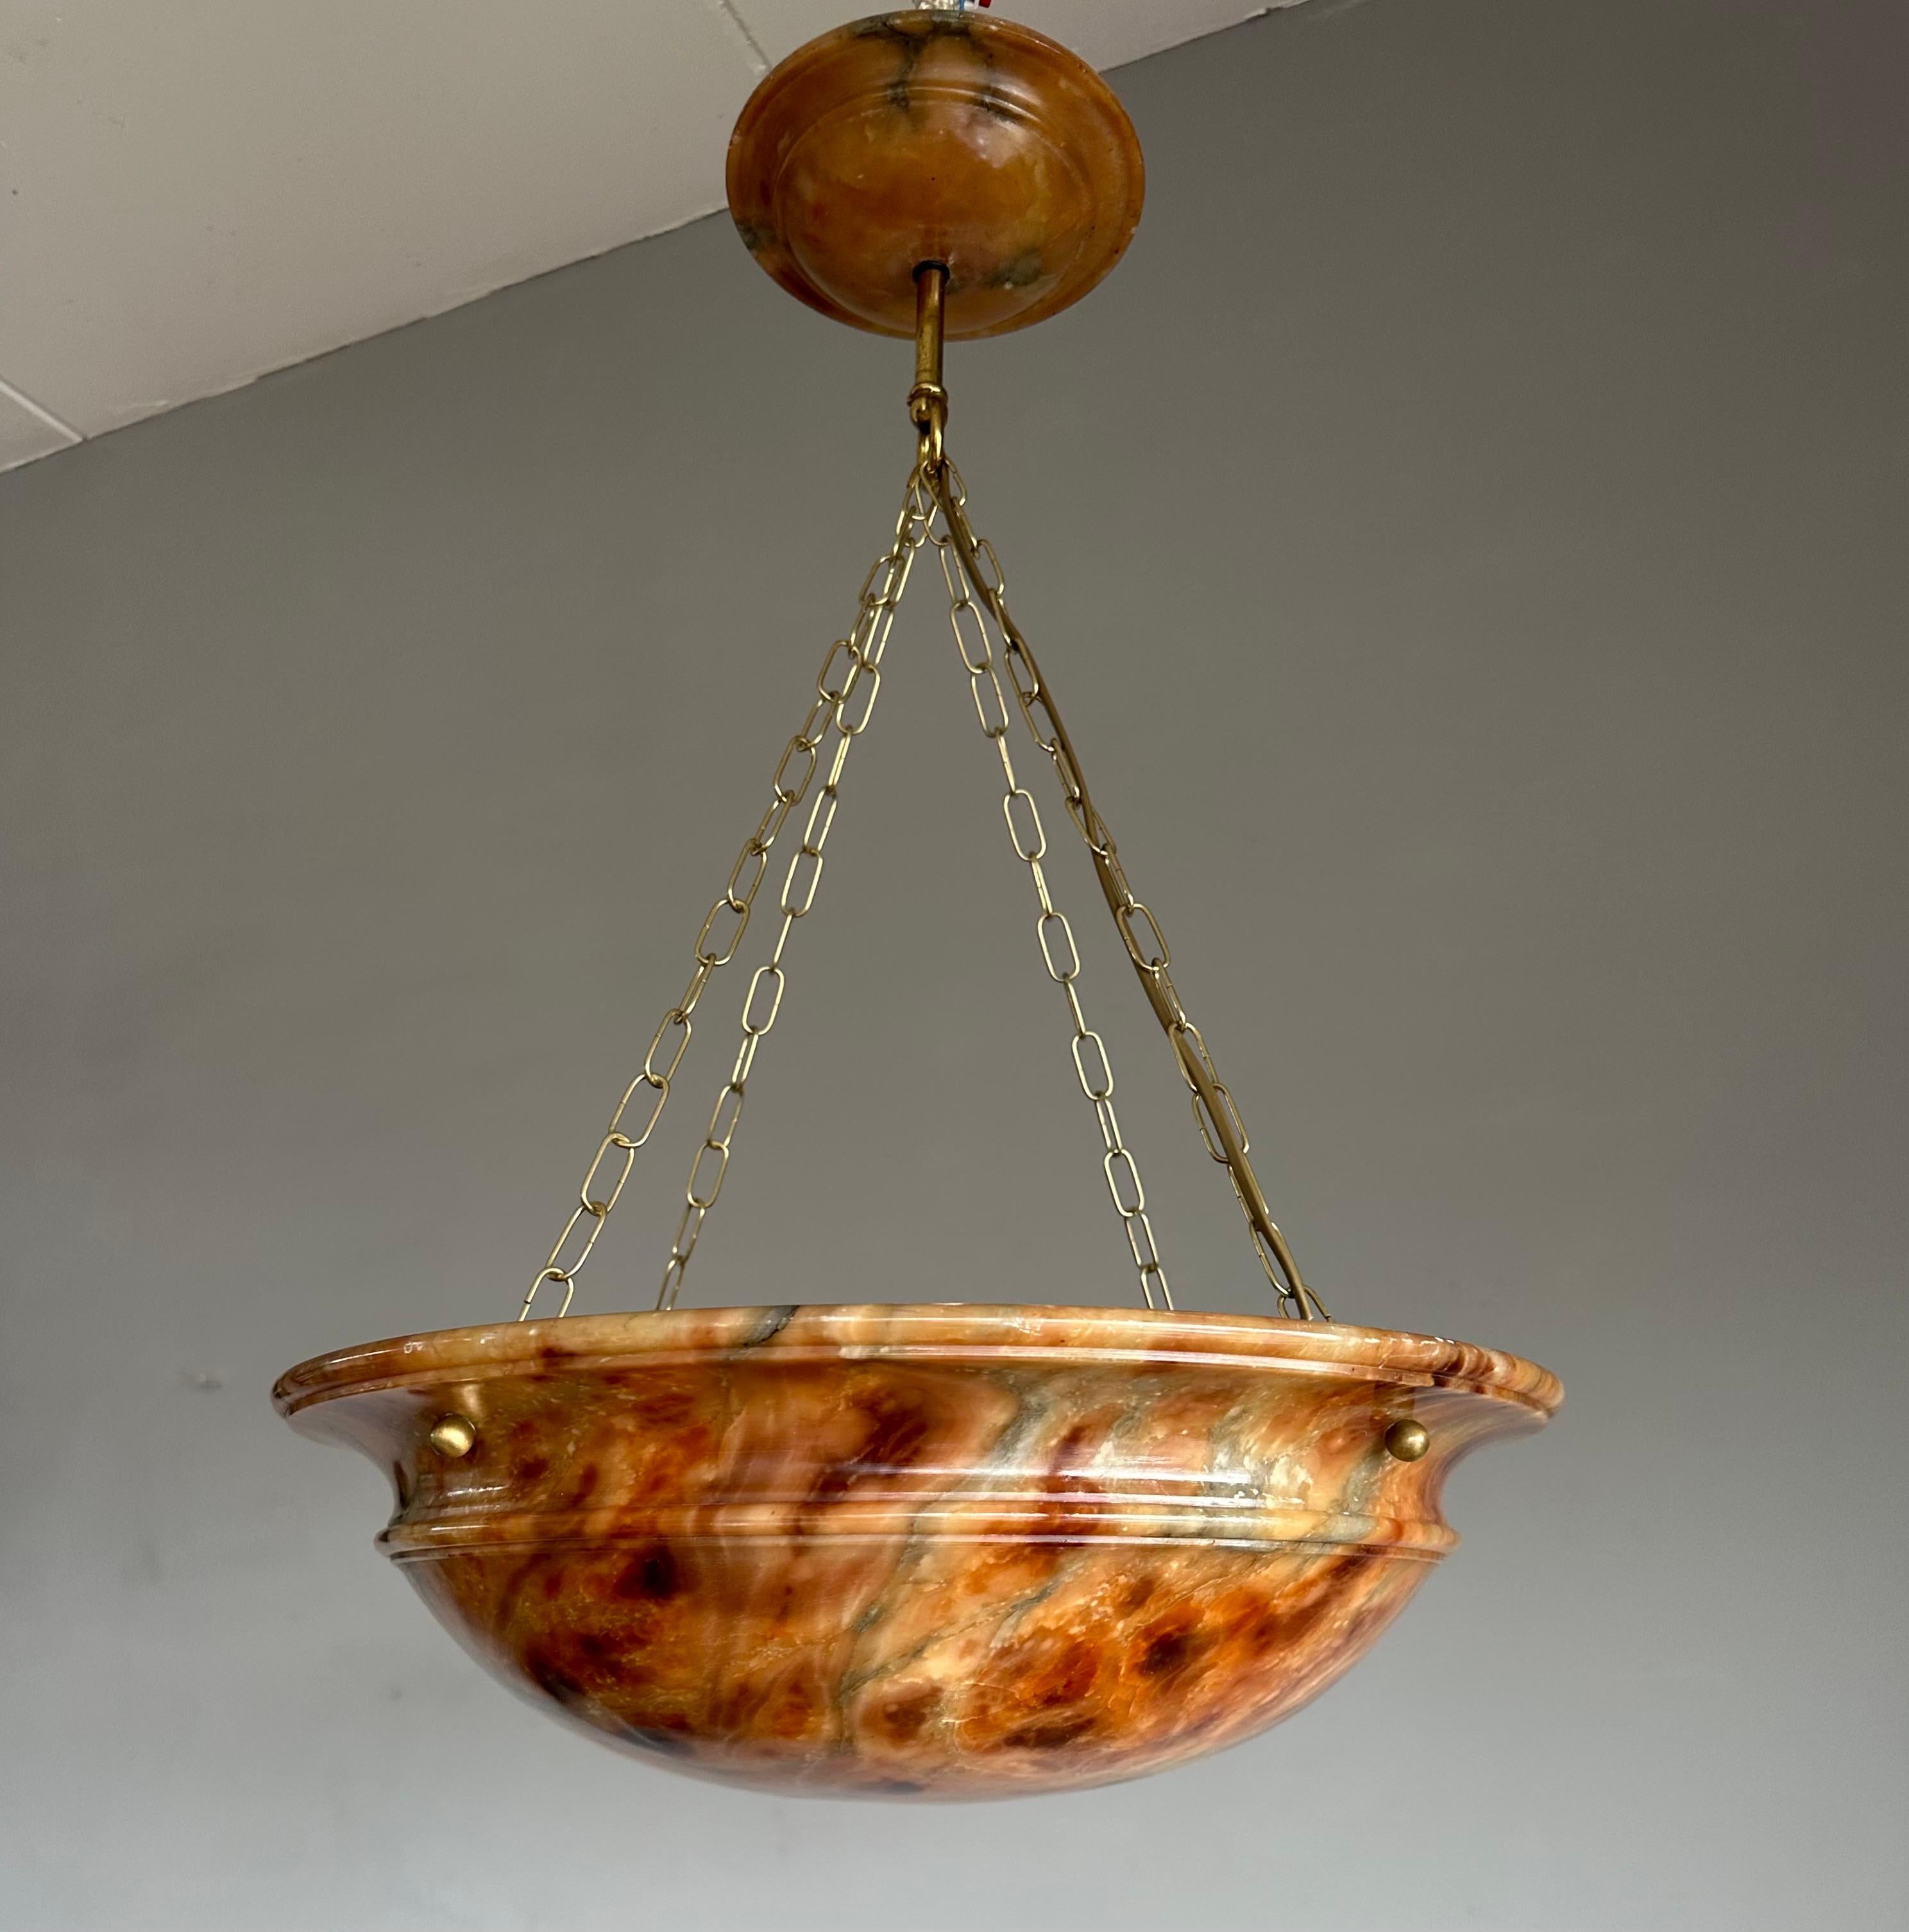 Extra large, Timless shape and warmest color, four light chandelier with matching and mint canopy.

If you are looking for a truly beautiful, great quality and very good condition alabaster pendant then this striking specimen could be the one or